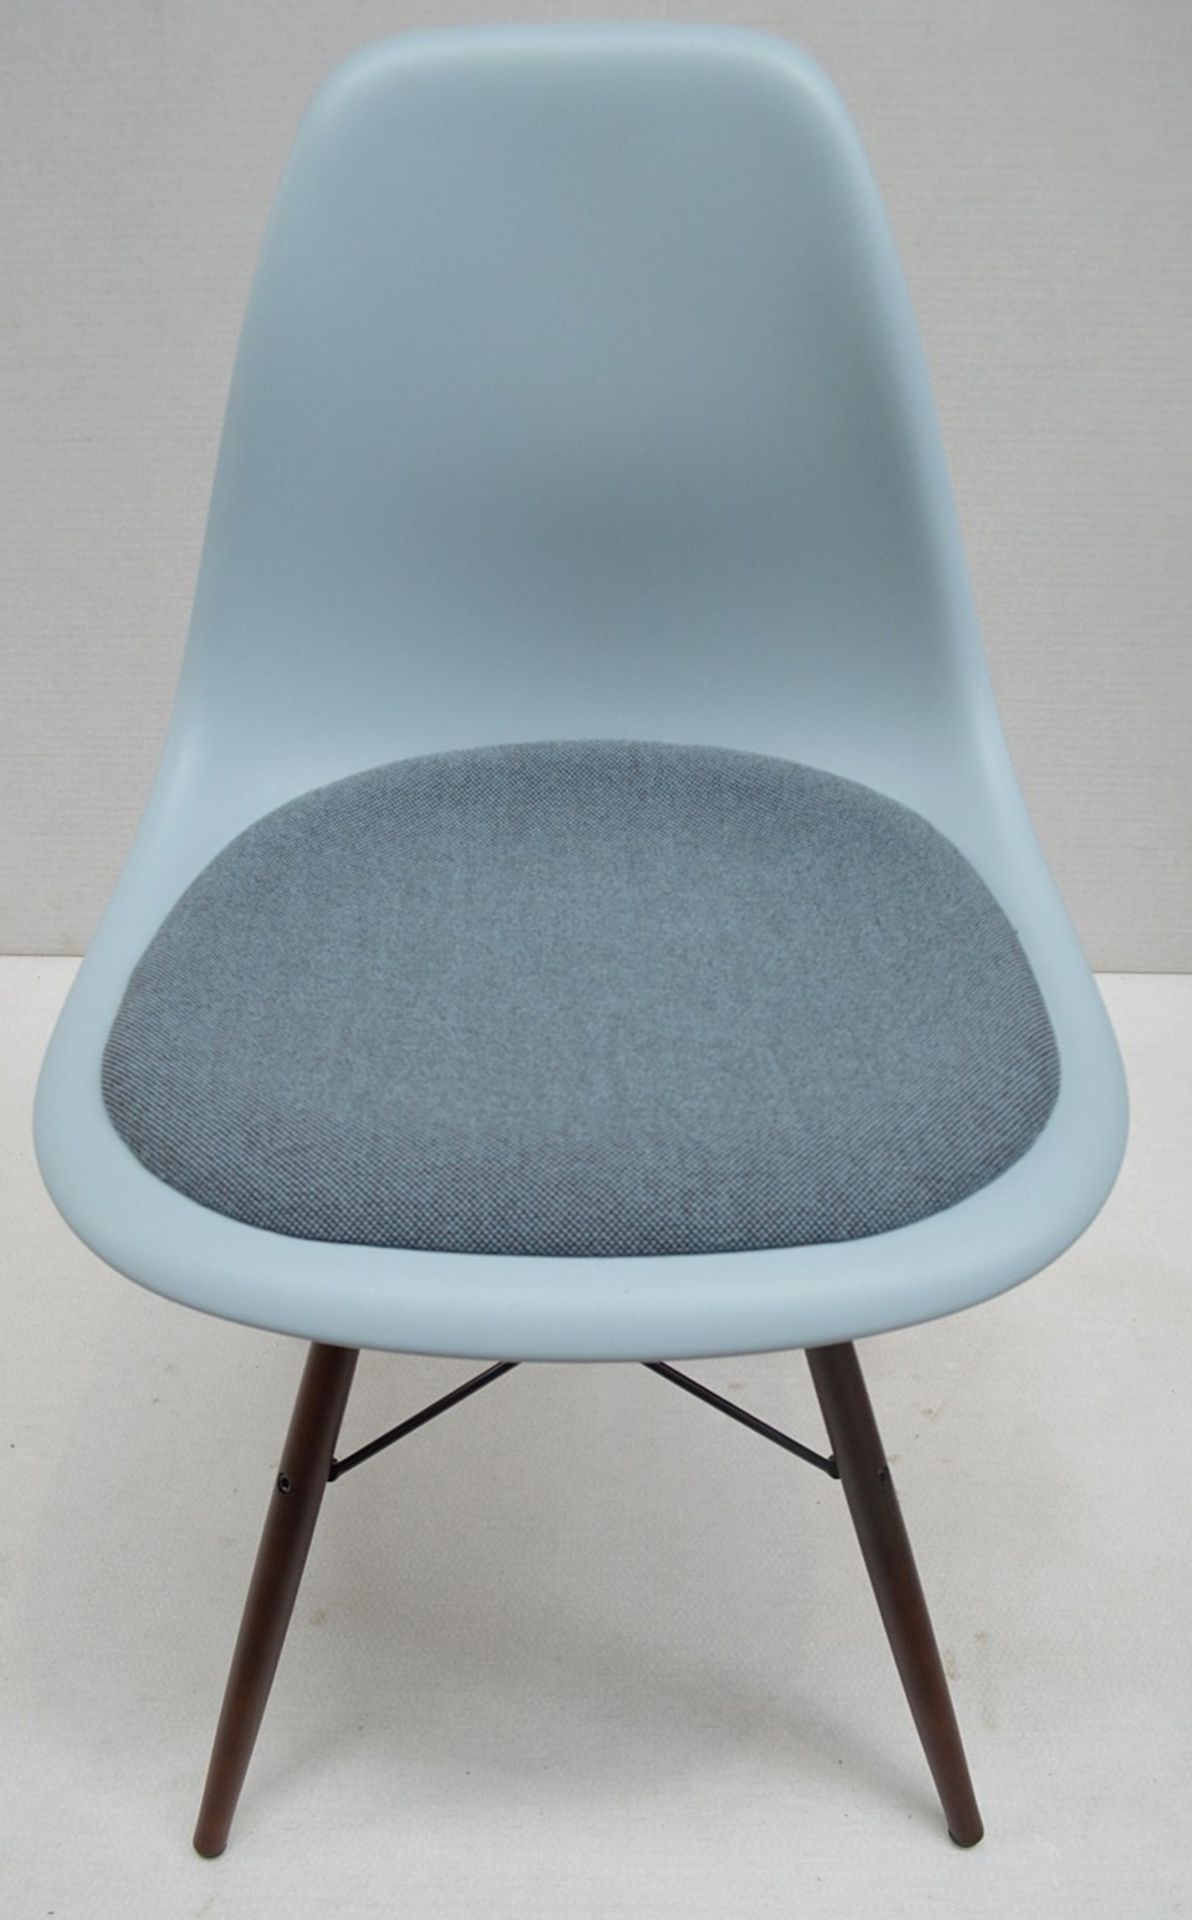 1 x VITRA Eames DSW Designer Chair With Upholsted Seat And Maple Base In A Dark Stain - Image 5 of 9